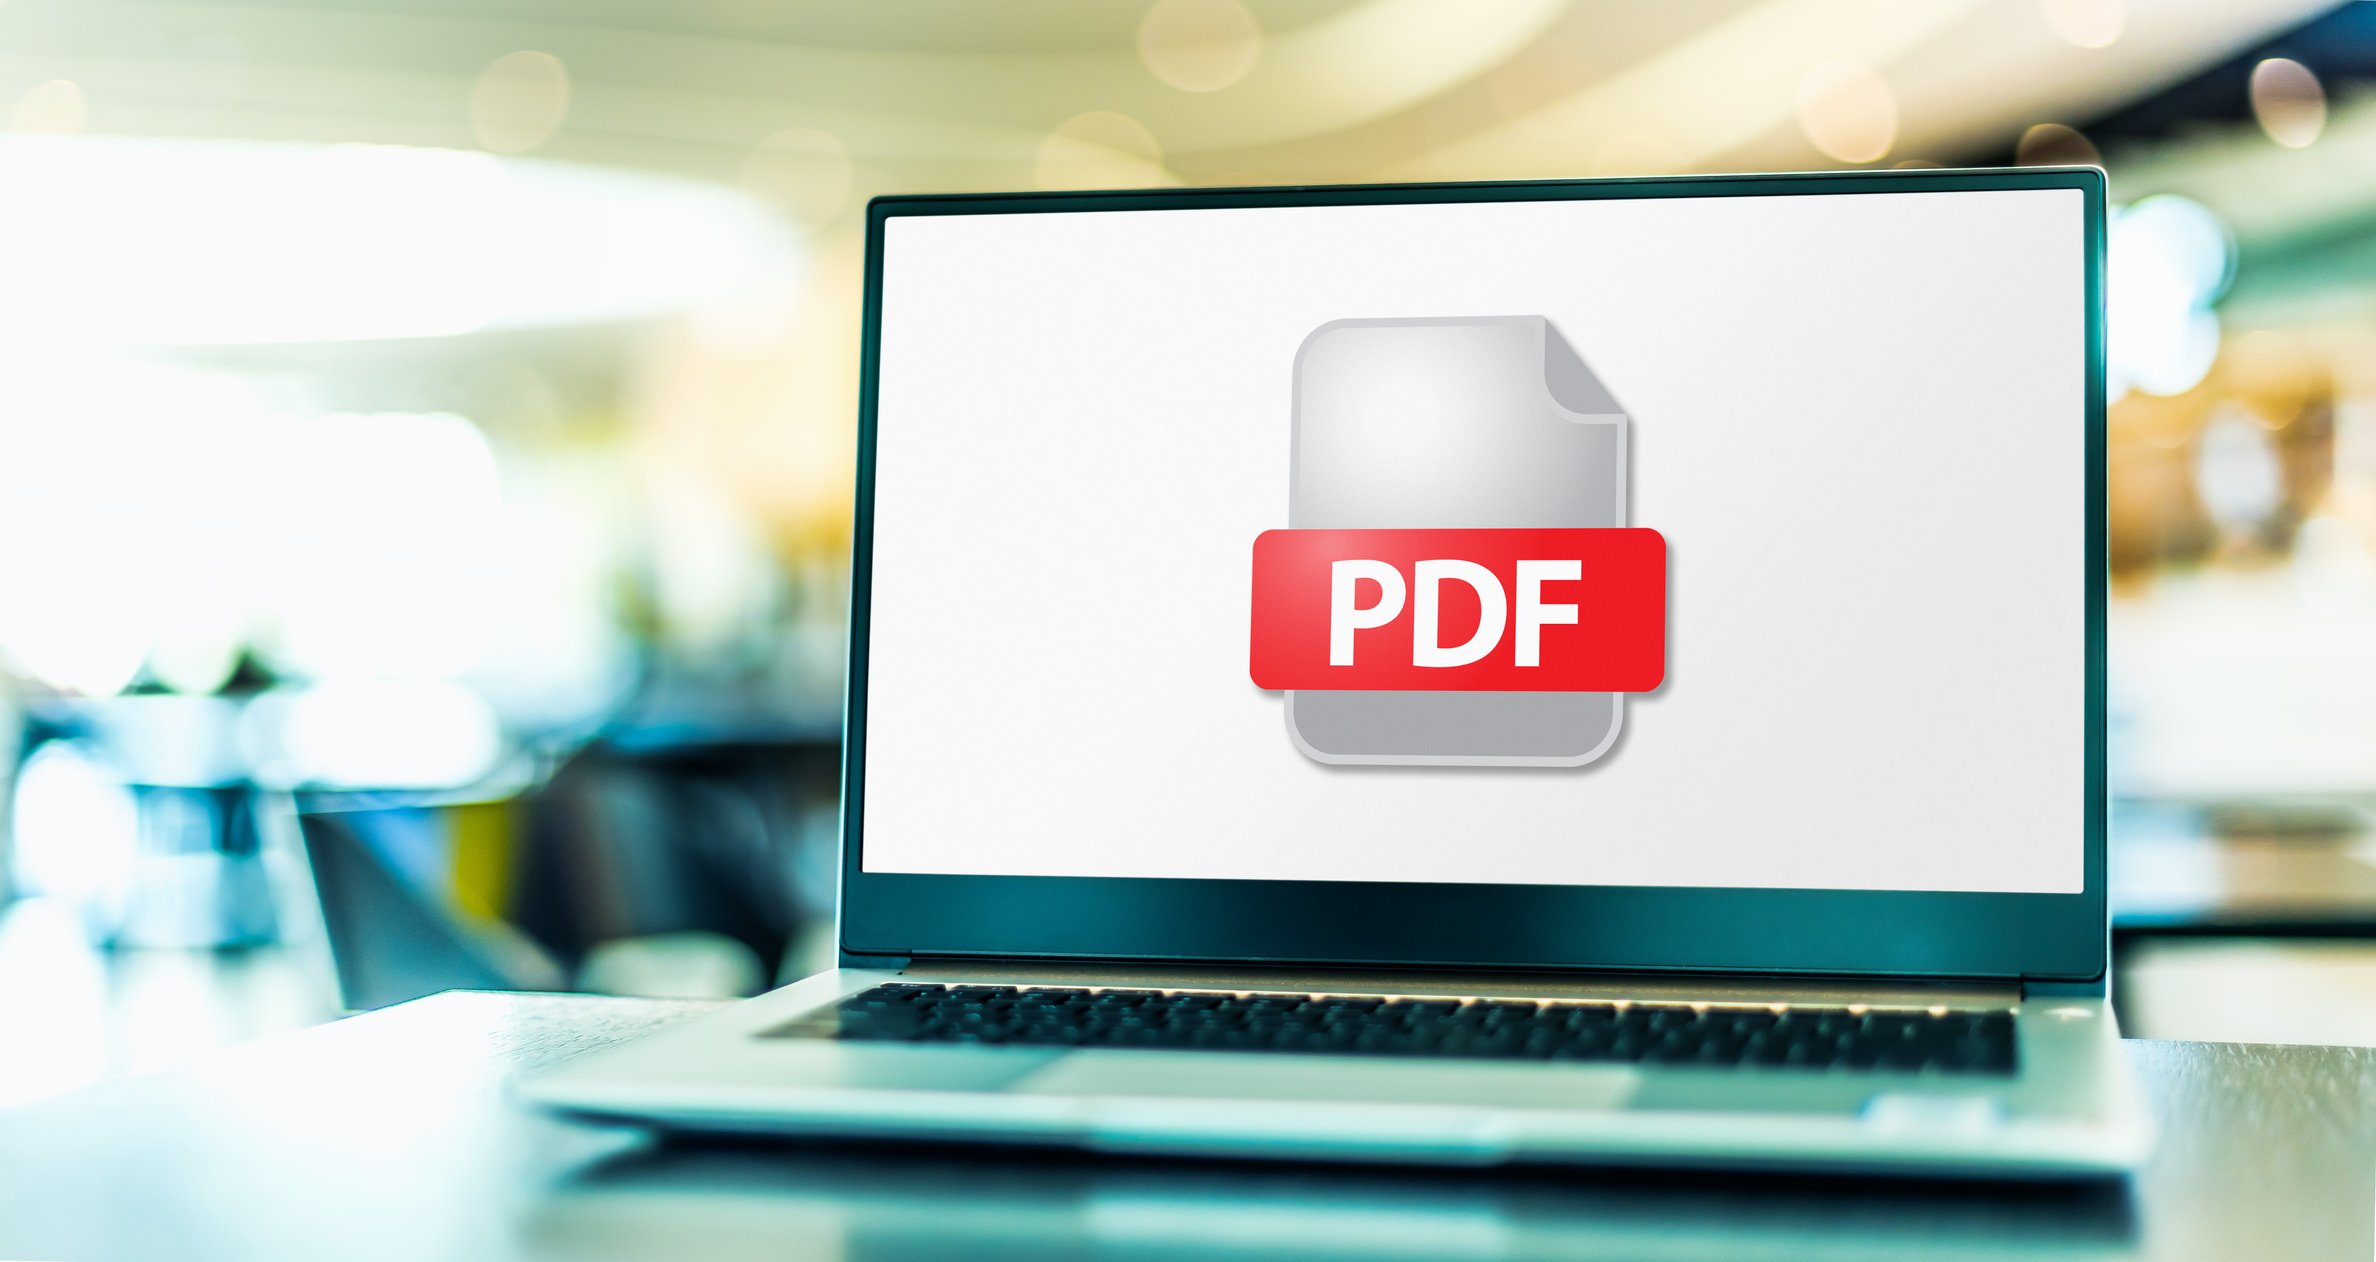 A lap top on a desk with a PDF document icon to represent ways to convert documents to PDF